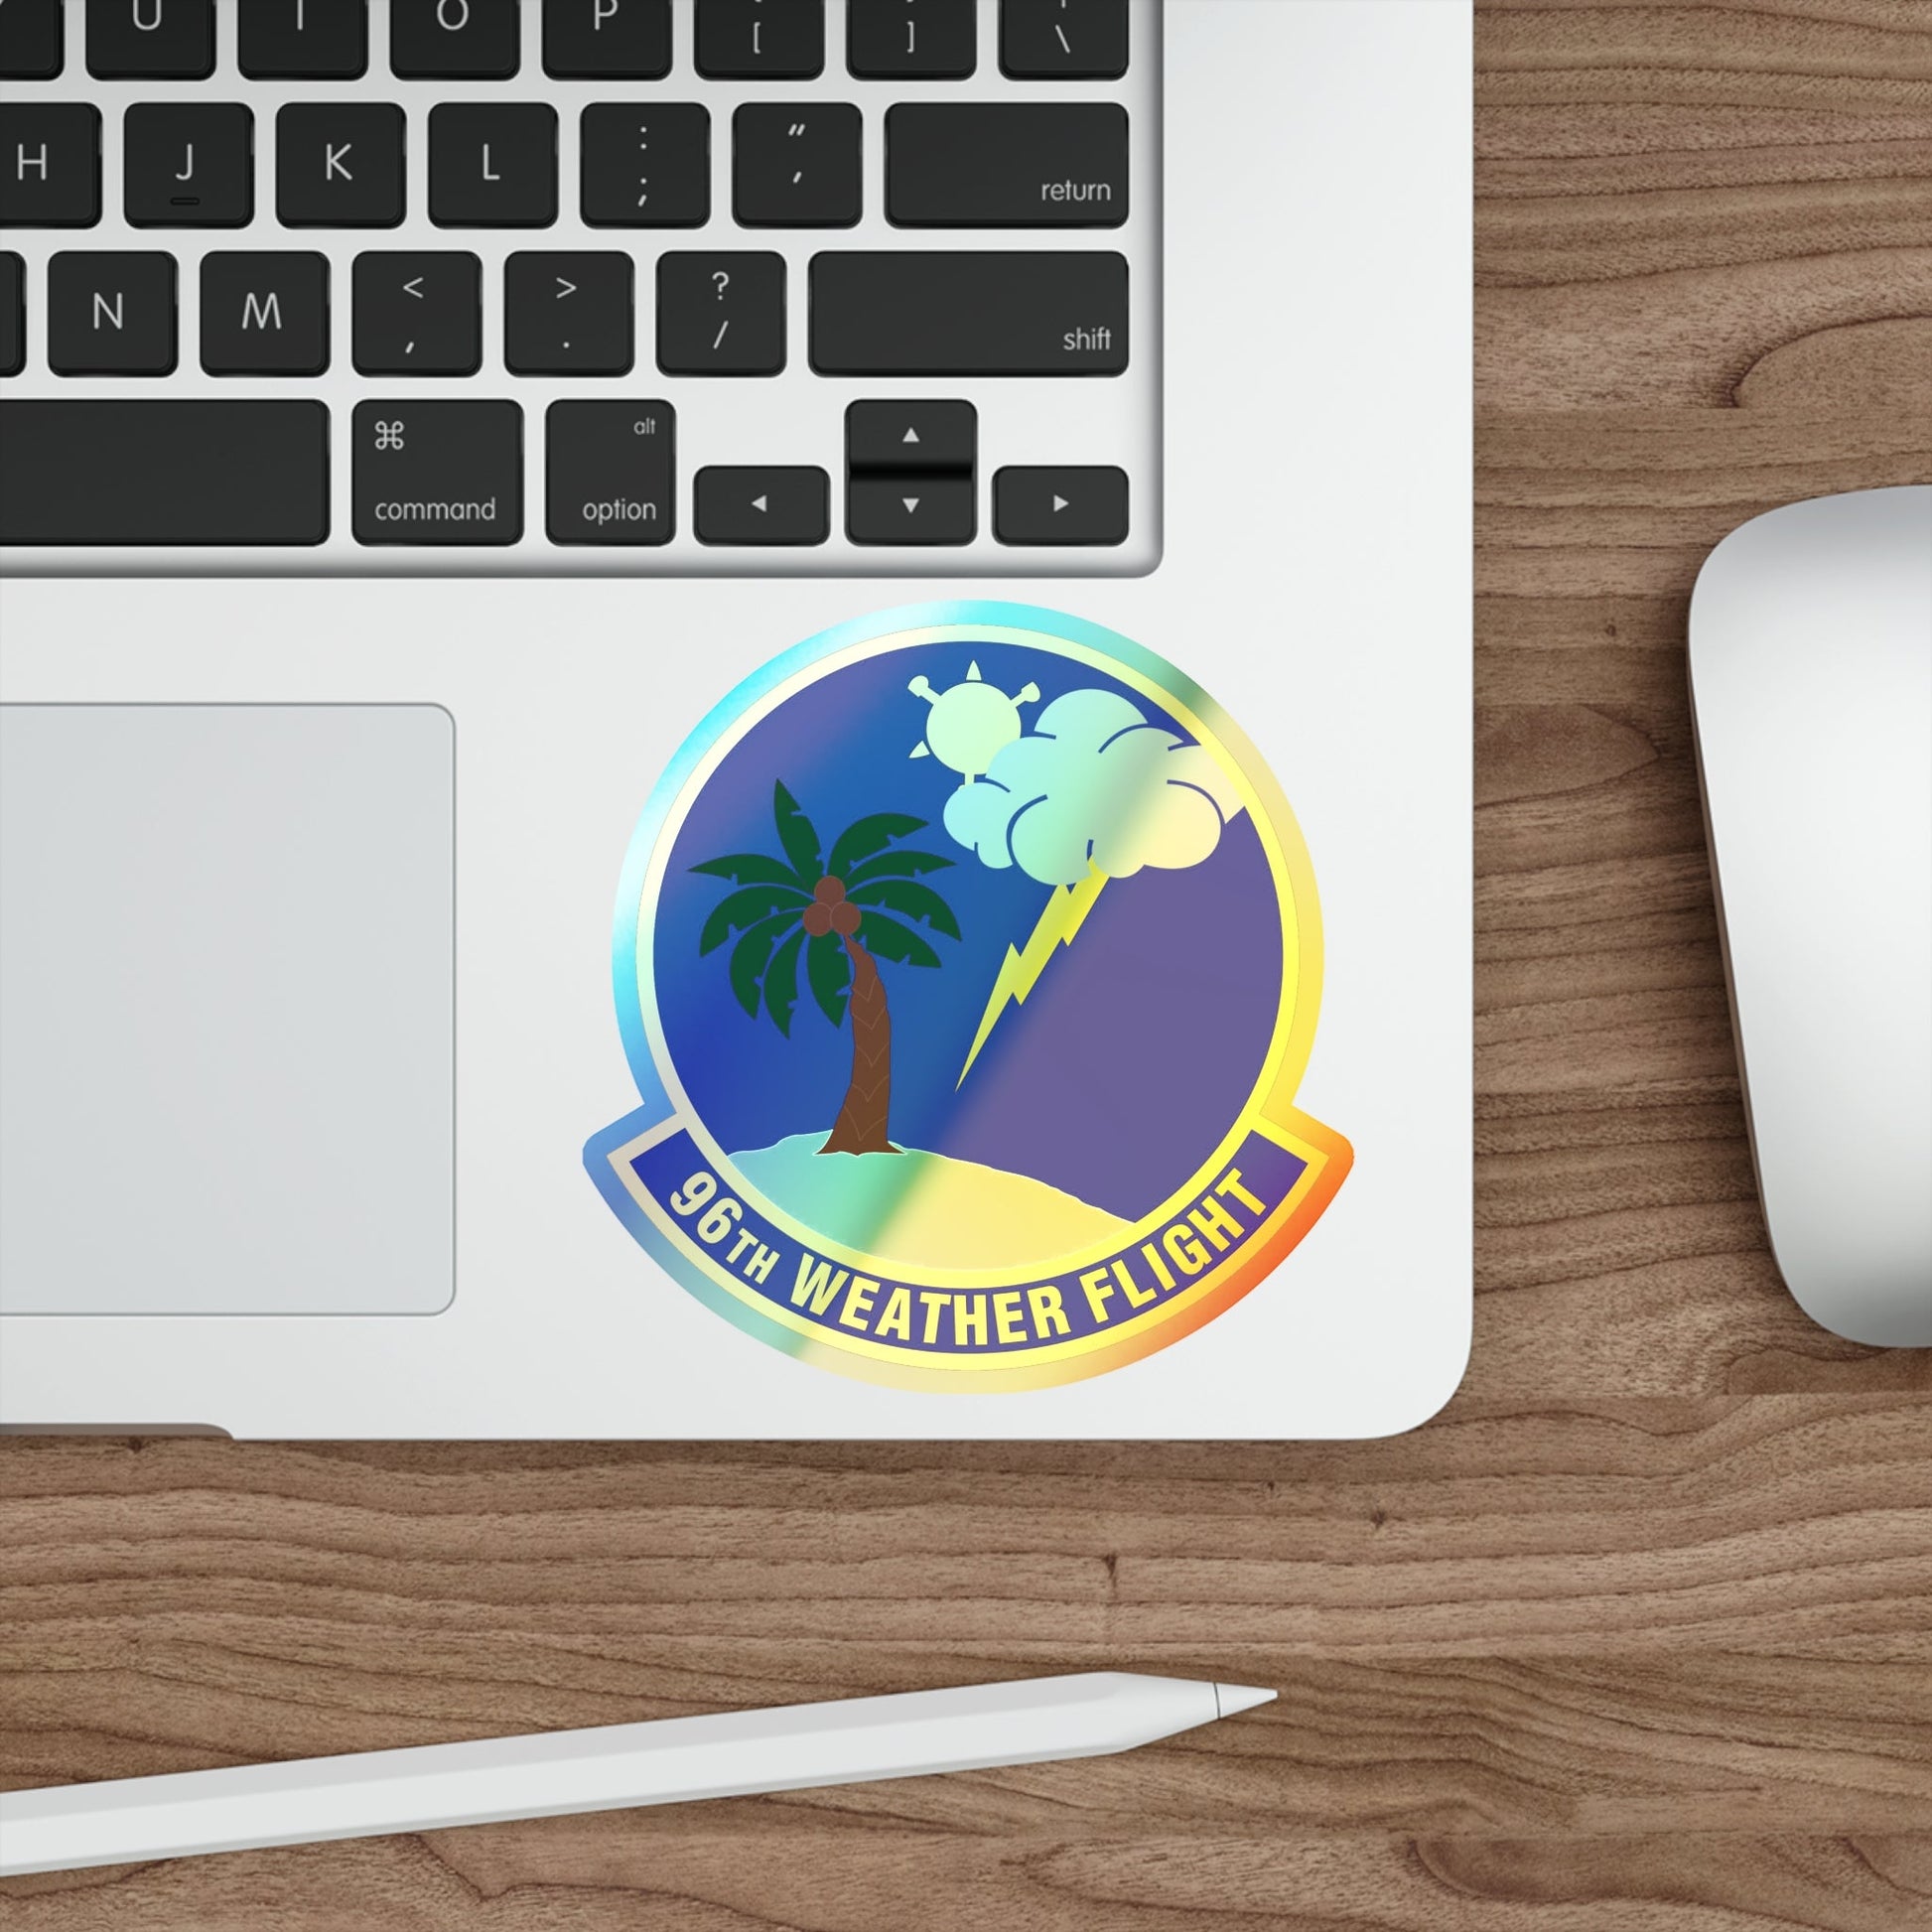 96th Weather Flight (U.S. Air Force) Holographic STICKER Die-Cut Vinyl Decal-The Sticker Space